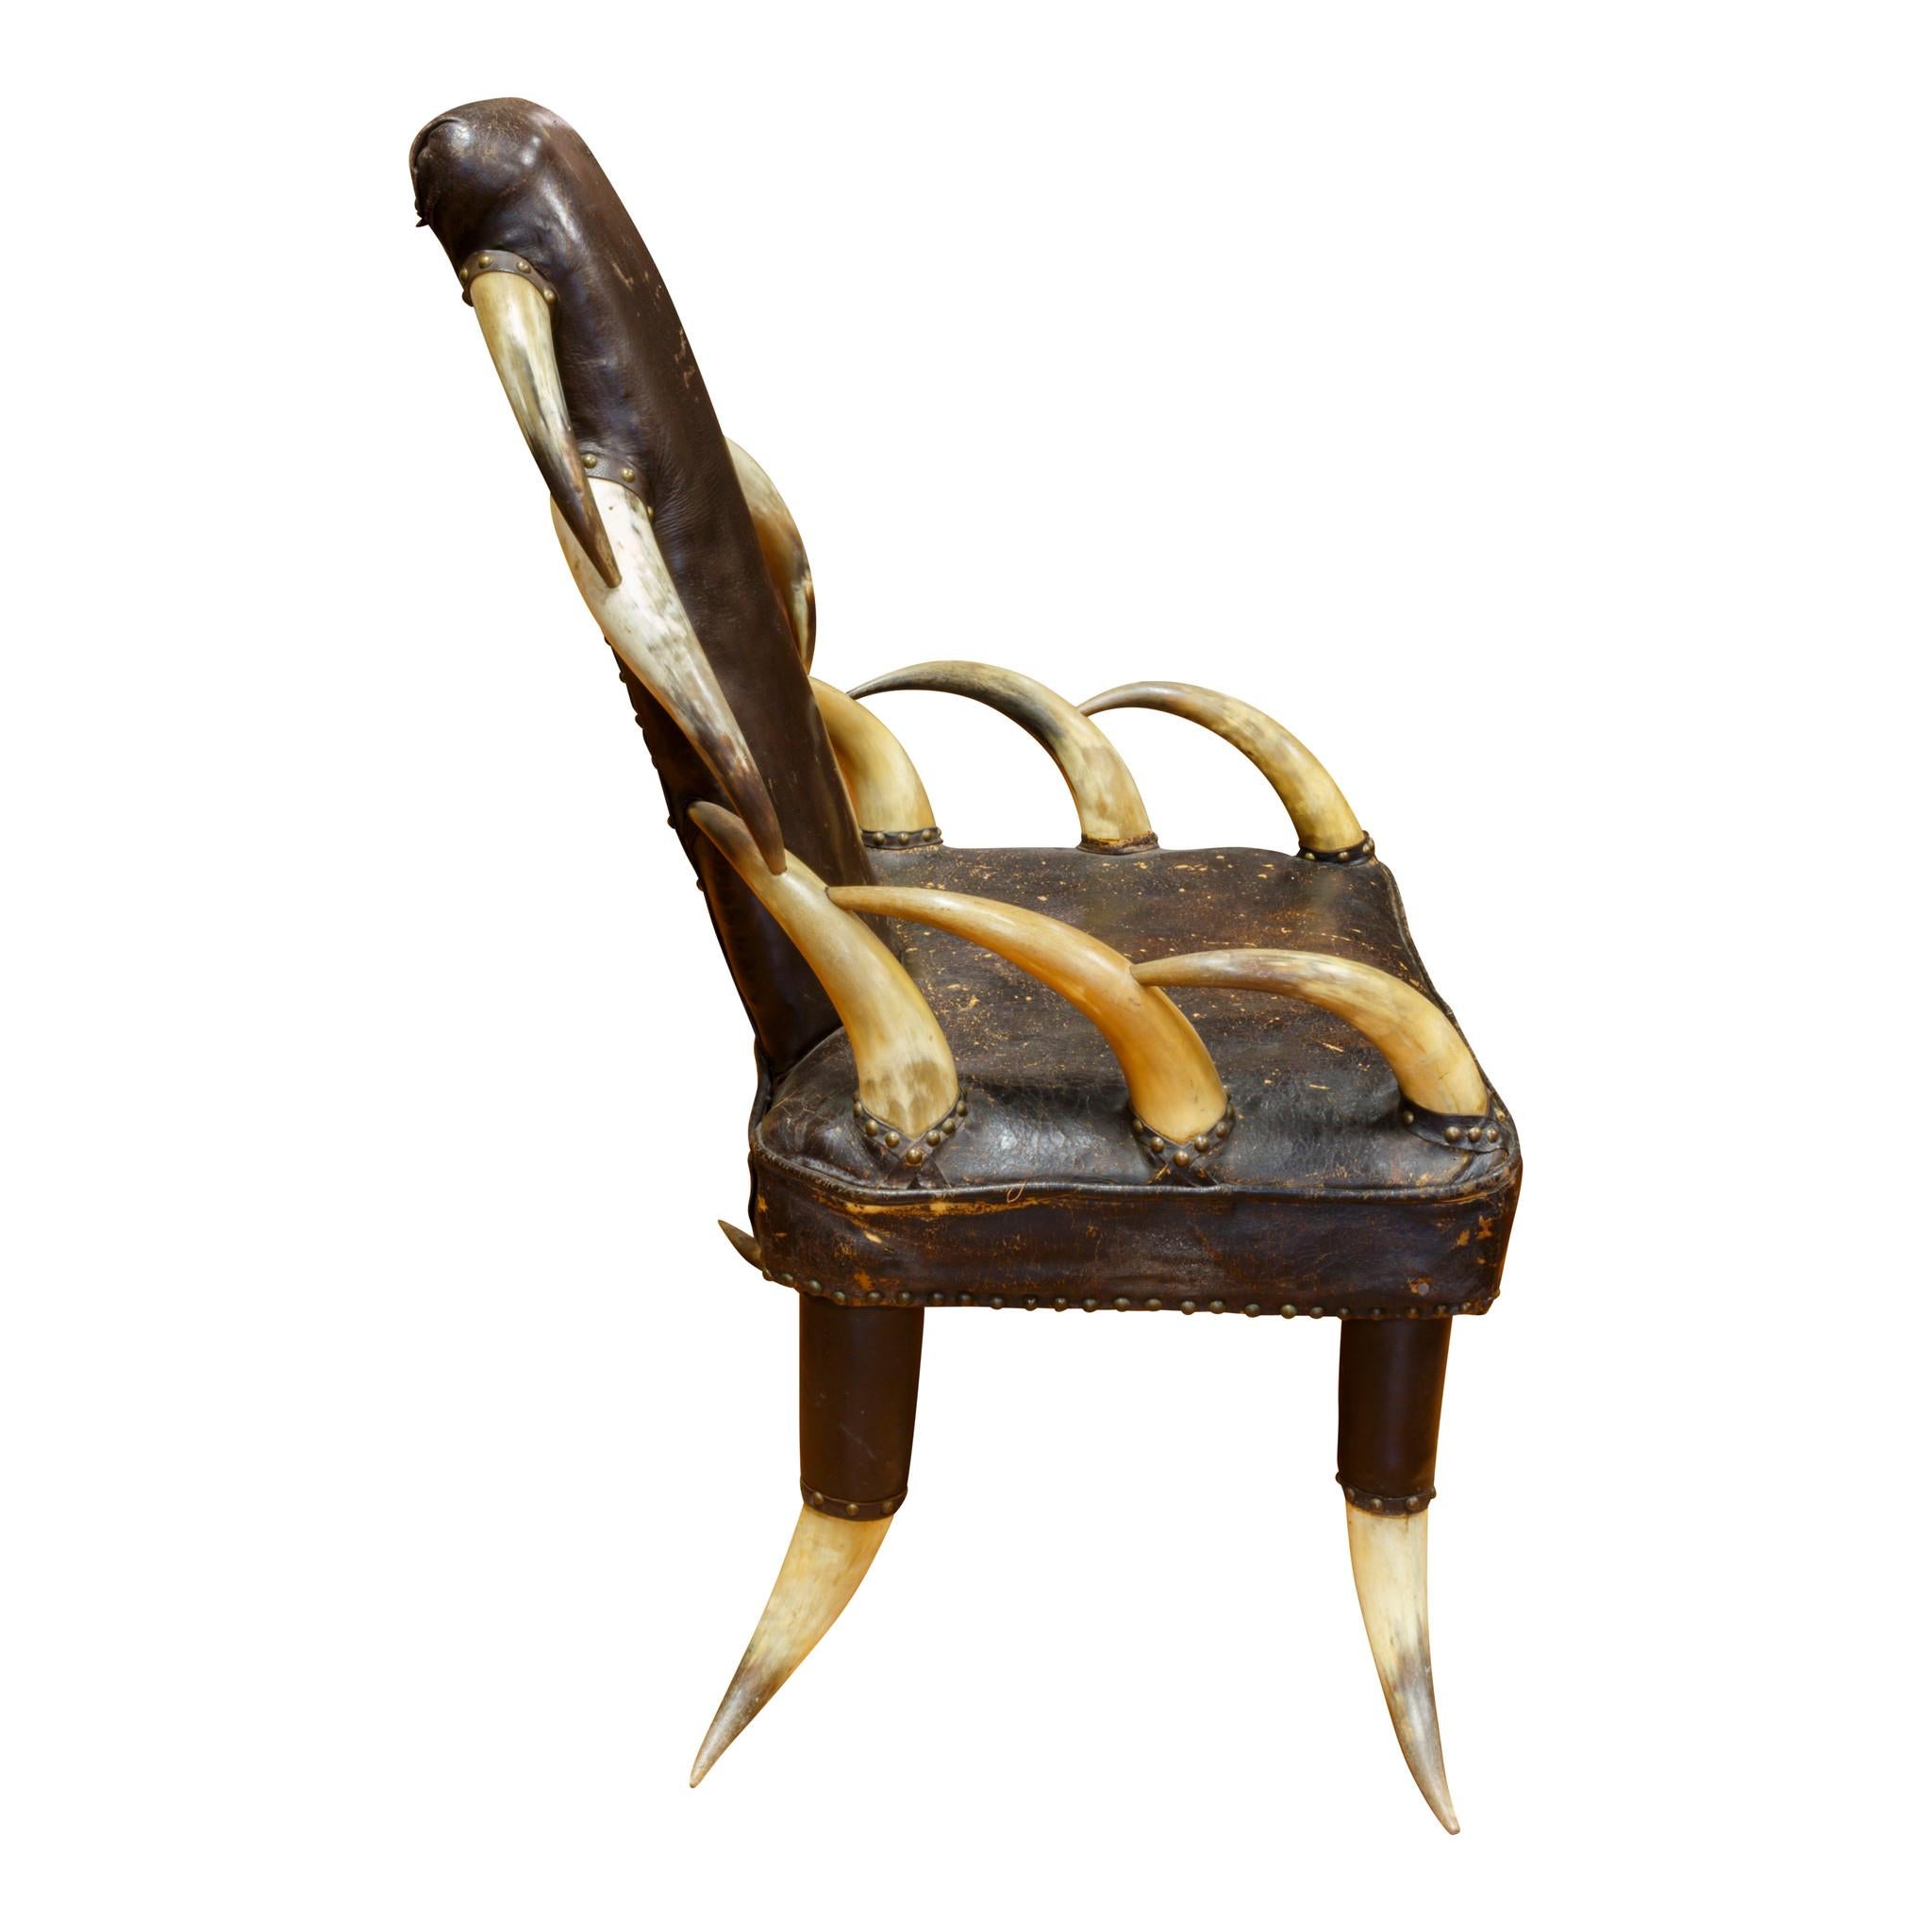 19th Century fourteen horn chair. Original brown leather with tacked upholstery. A sculpture and functional piece.

Period: Last quarter of 19th century
Origin: Montana
Size: Feet 33